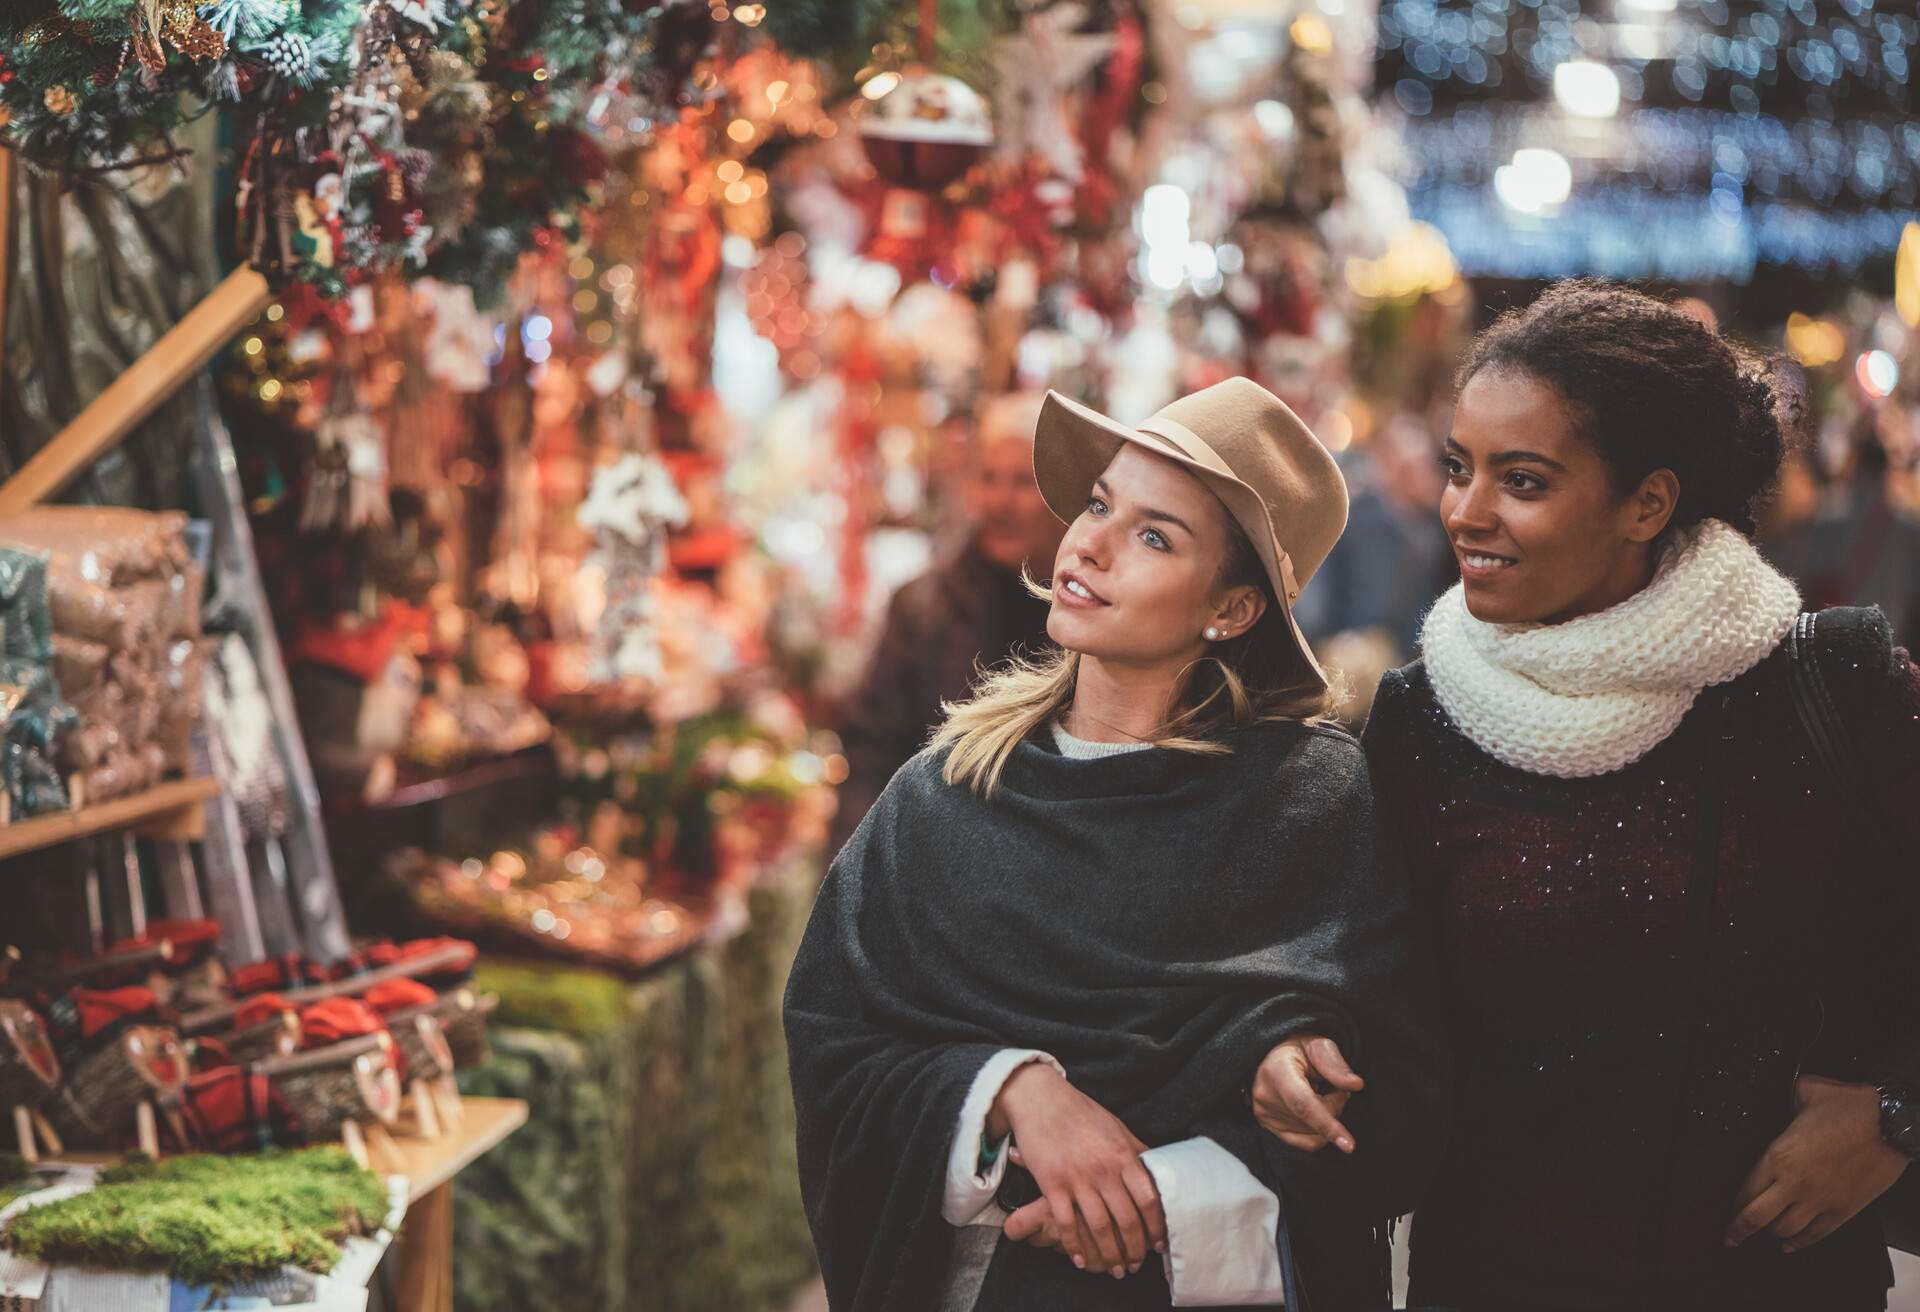 Two women looking at the Christmas ornaments displayed outside the stalls.